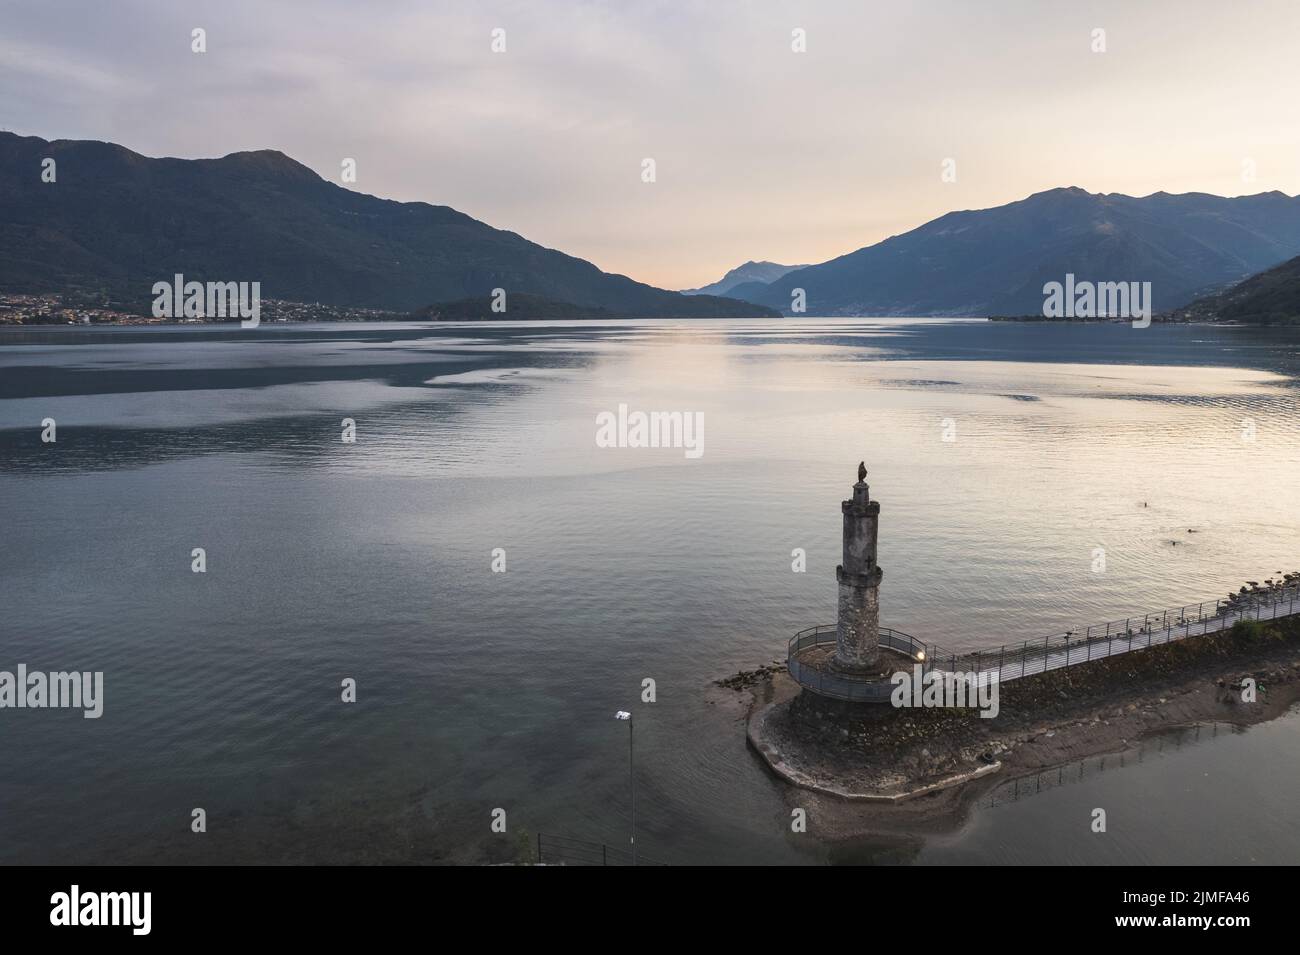 Aerial view of Lake of Como in Port of Gera Lario. Harbor entrance with Madonna on top of the tower. Italy Stock Photo